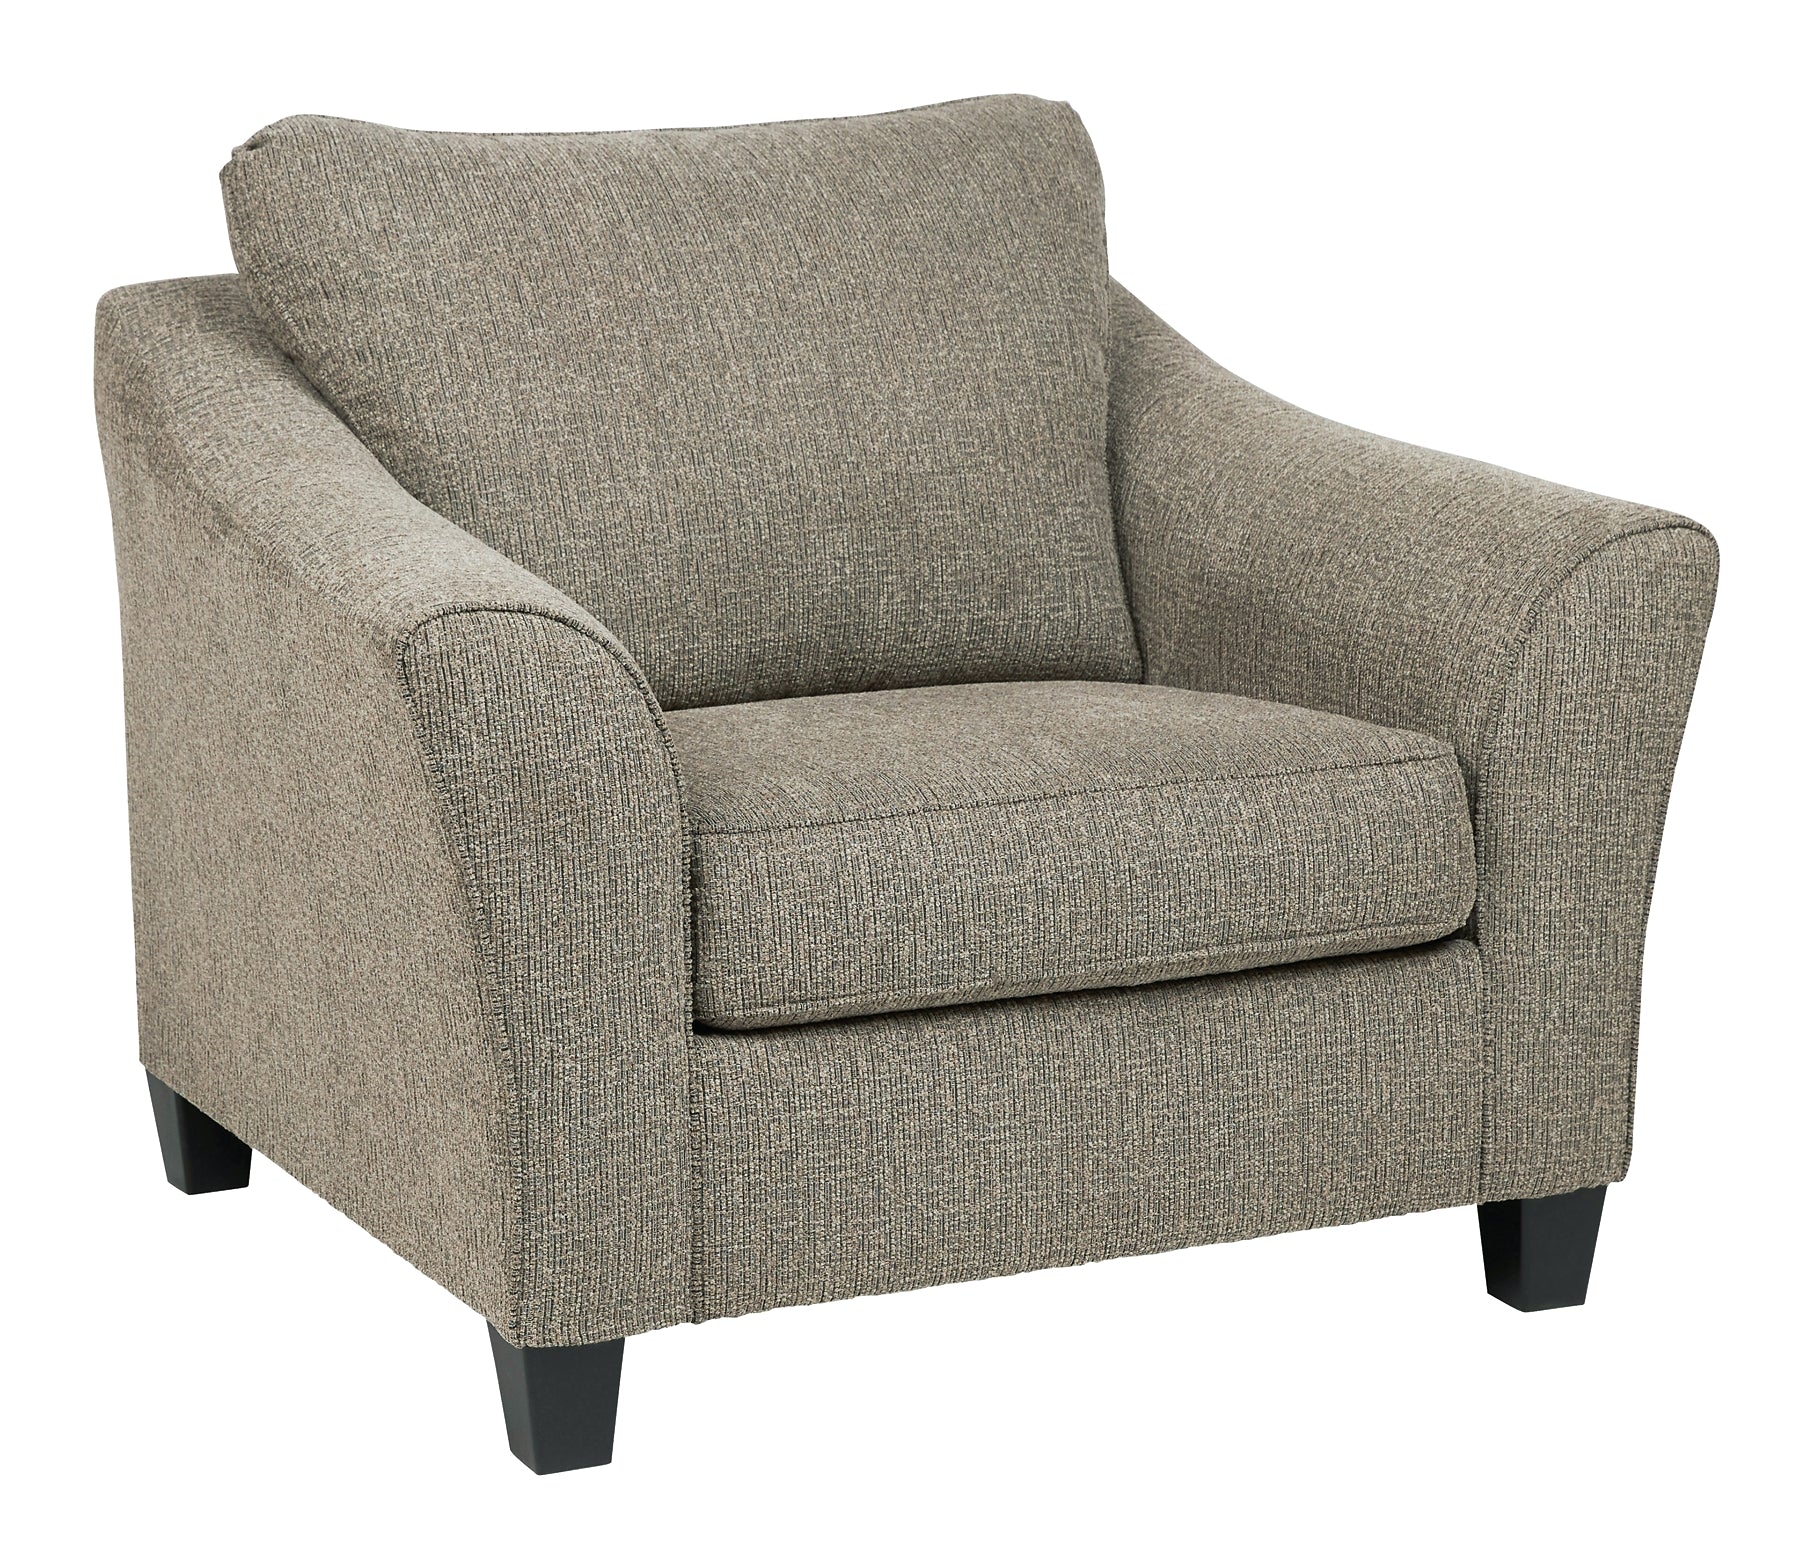 Barnesley Chair and Ottoman Smyrna Furniture Outlet